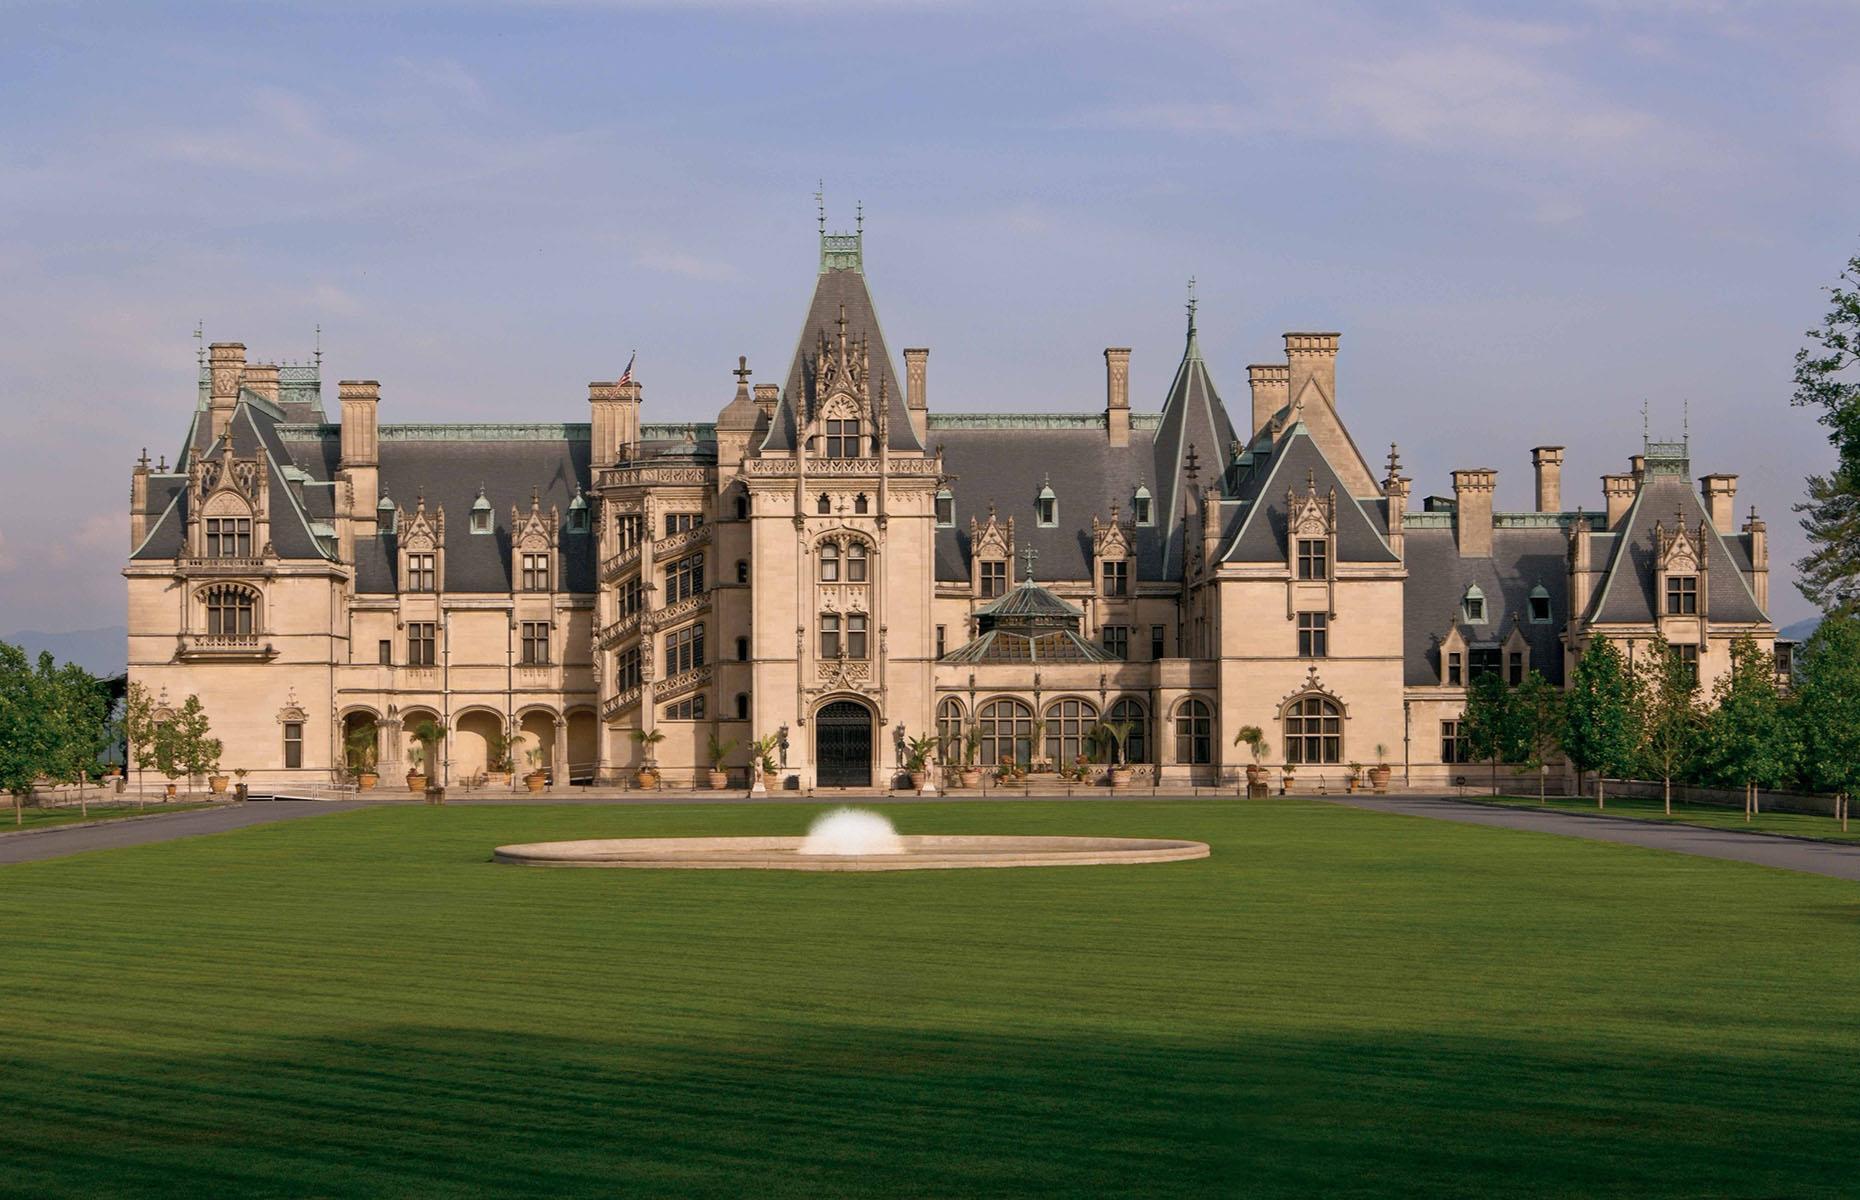 <p>George called upon the family-favourite architect William Morris Hunt, to design the colossal residence in the scenic countryside of Asheville, North Carolina, which he planned to name after the Dutch town of De Bilt, where the Vanderbilt family had its roots.</p>  <p>The 250-room mansion was to be modelled after French Chateaux, and would preside over 700 parcels of land totalling 250,000 acres.</p>